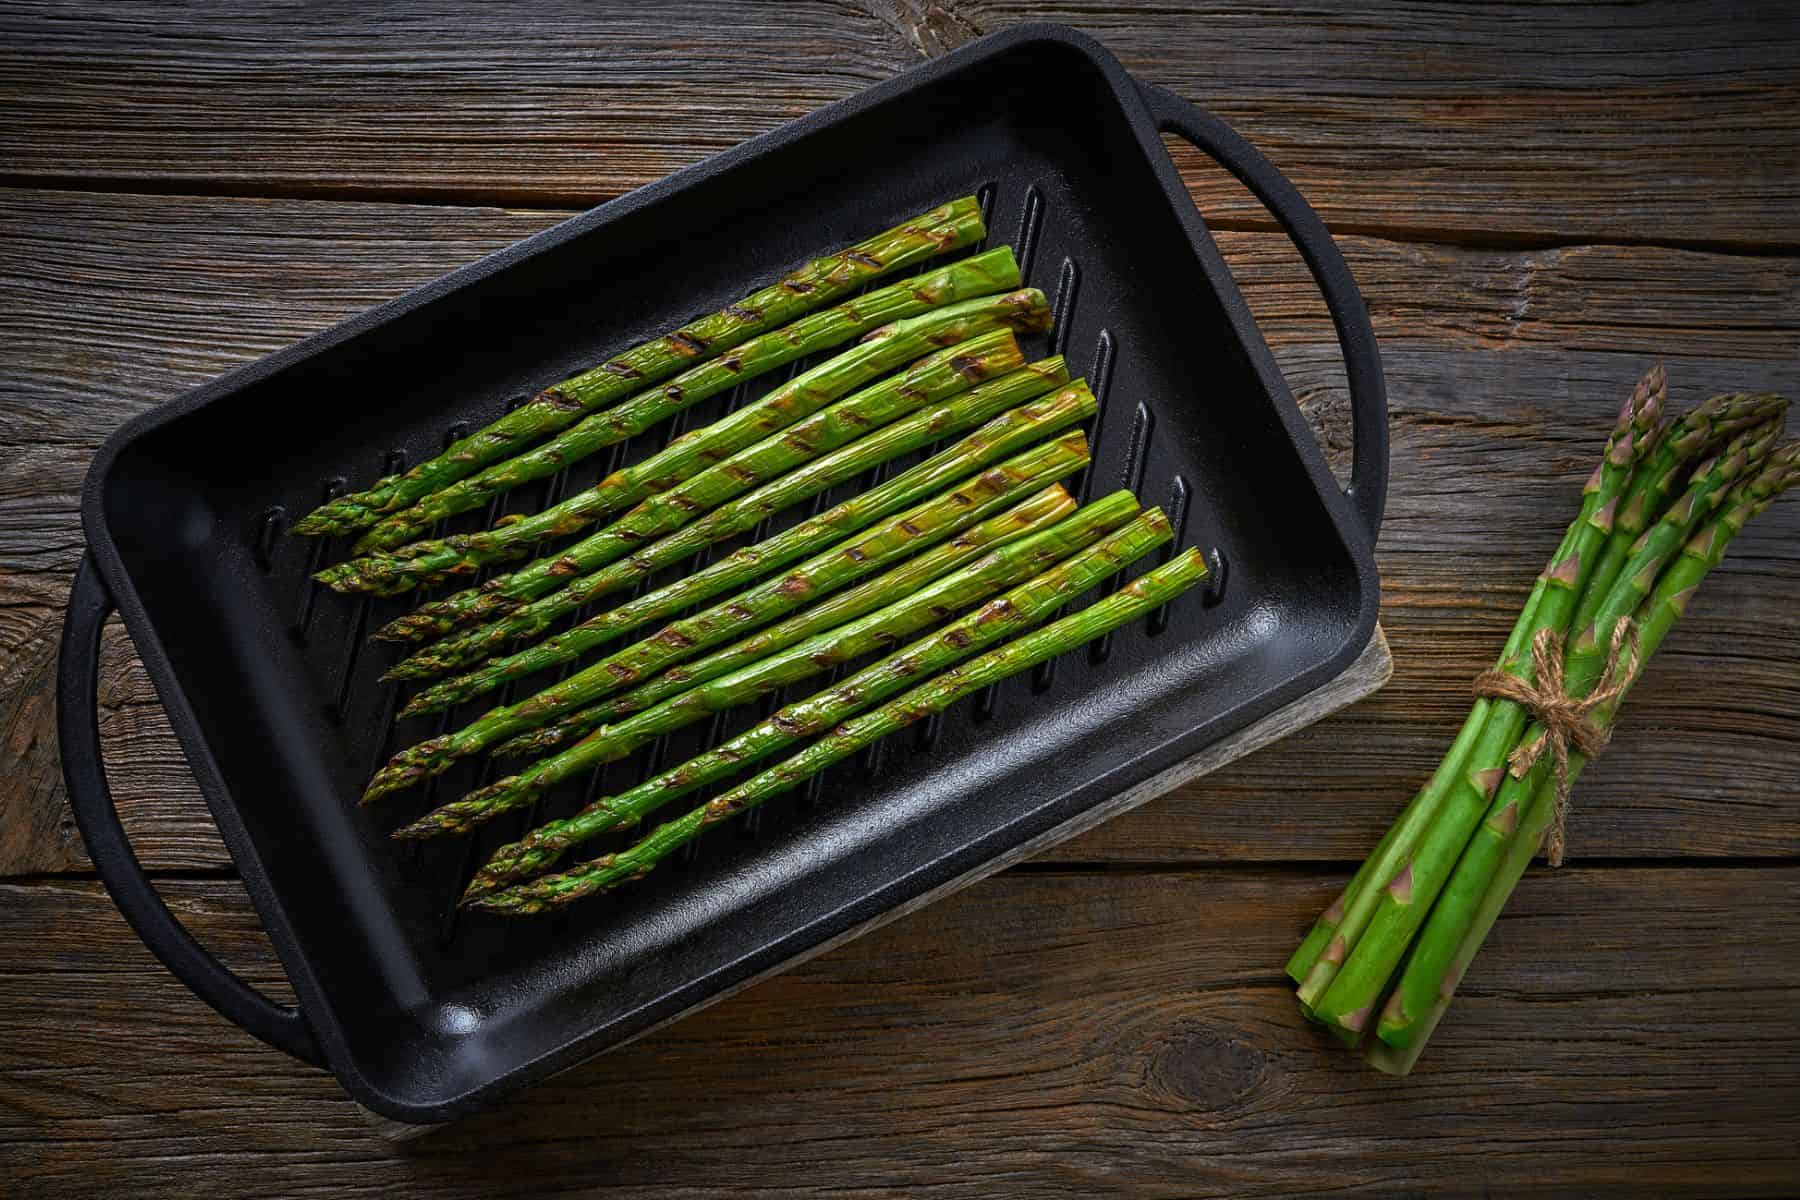 Fresh asparagus spears arranged neatly on a black roasting pan, ready to cook, with a bundle of asparagus placed beside it on a rustic wooden surface.